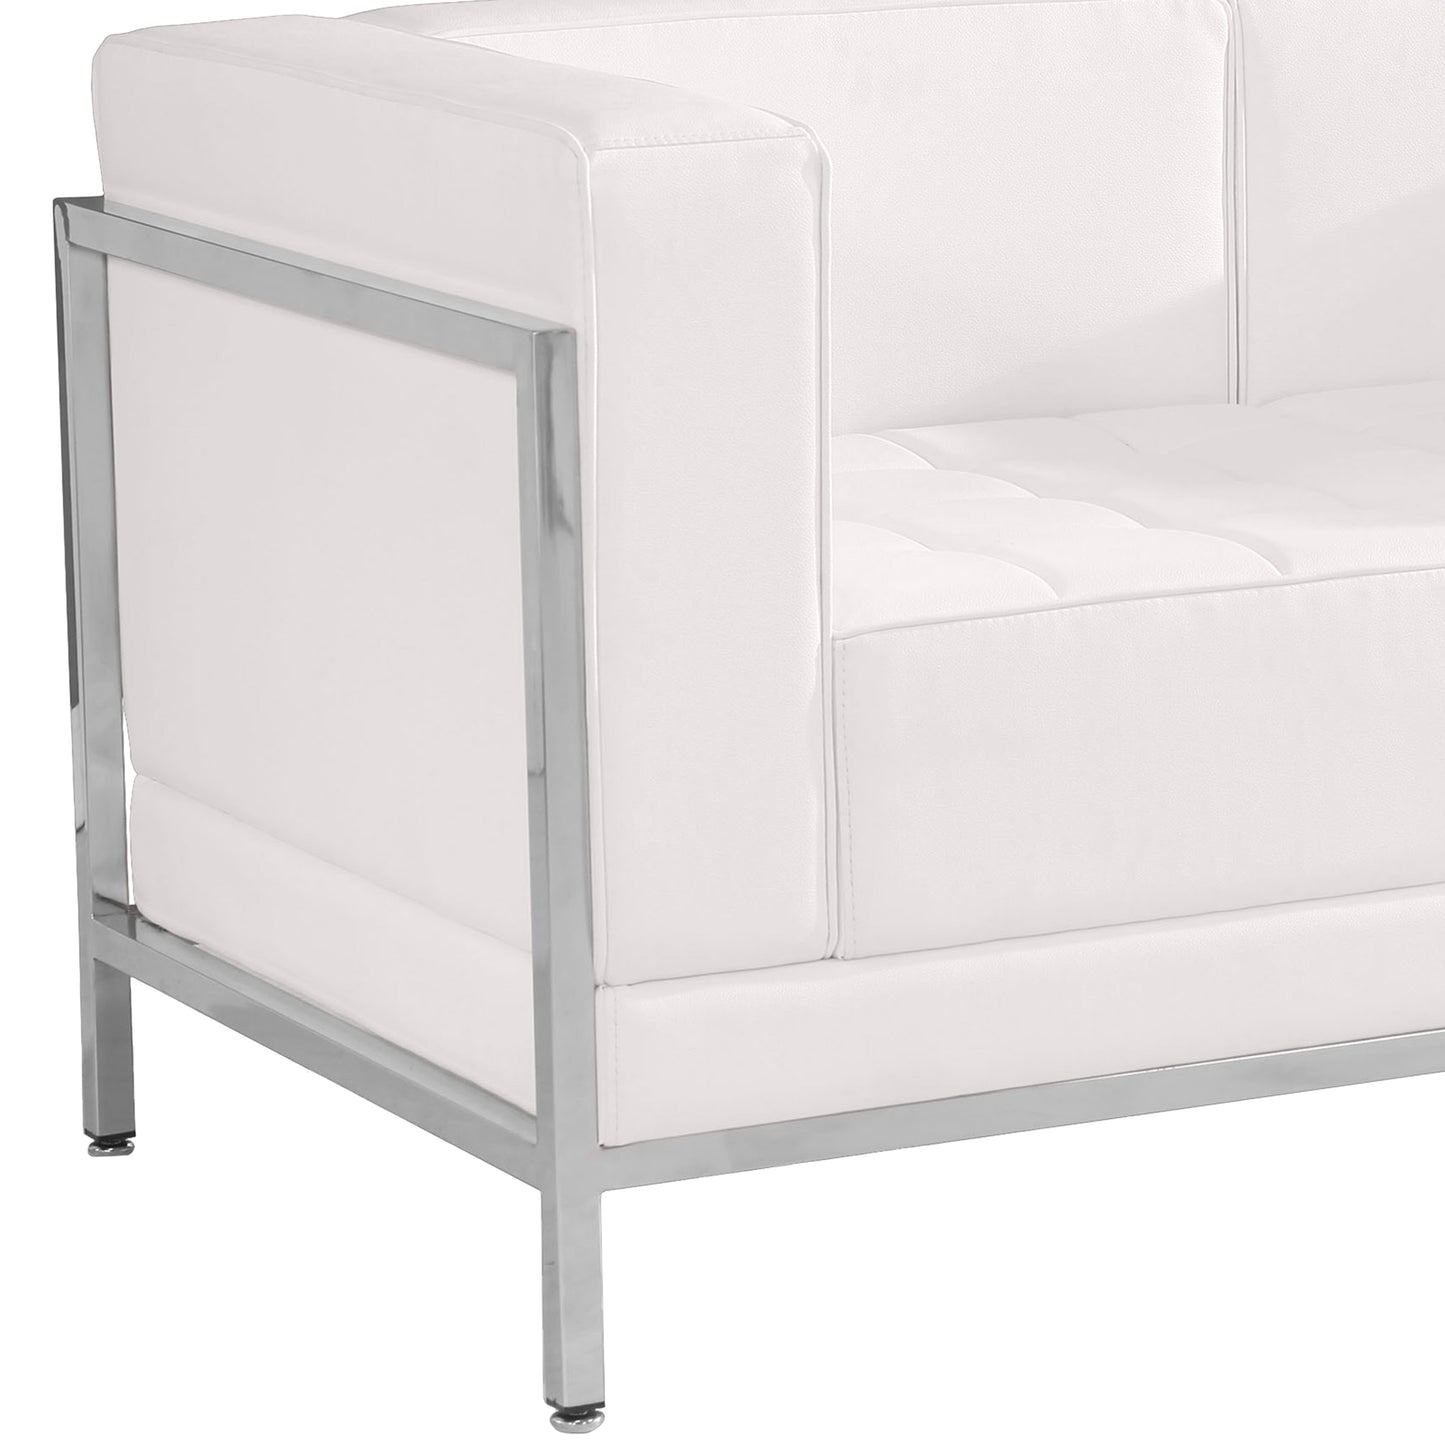 White Leather Loveseat ZB-IMAG-LS-WH-GG